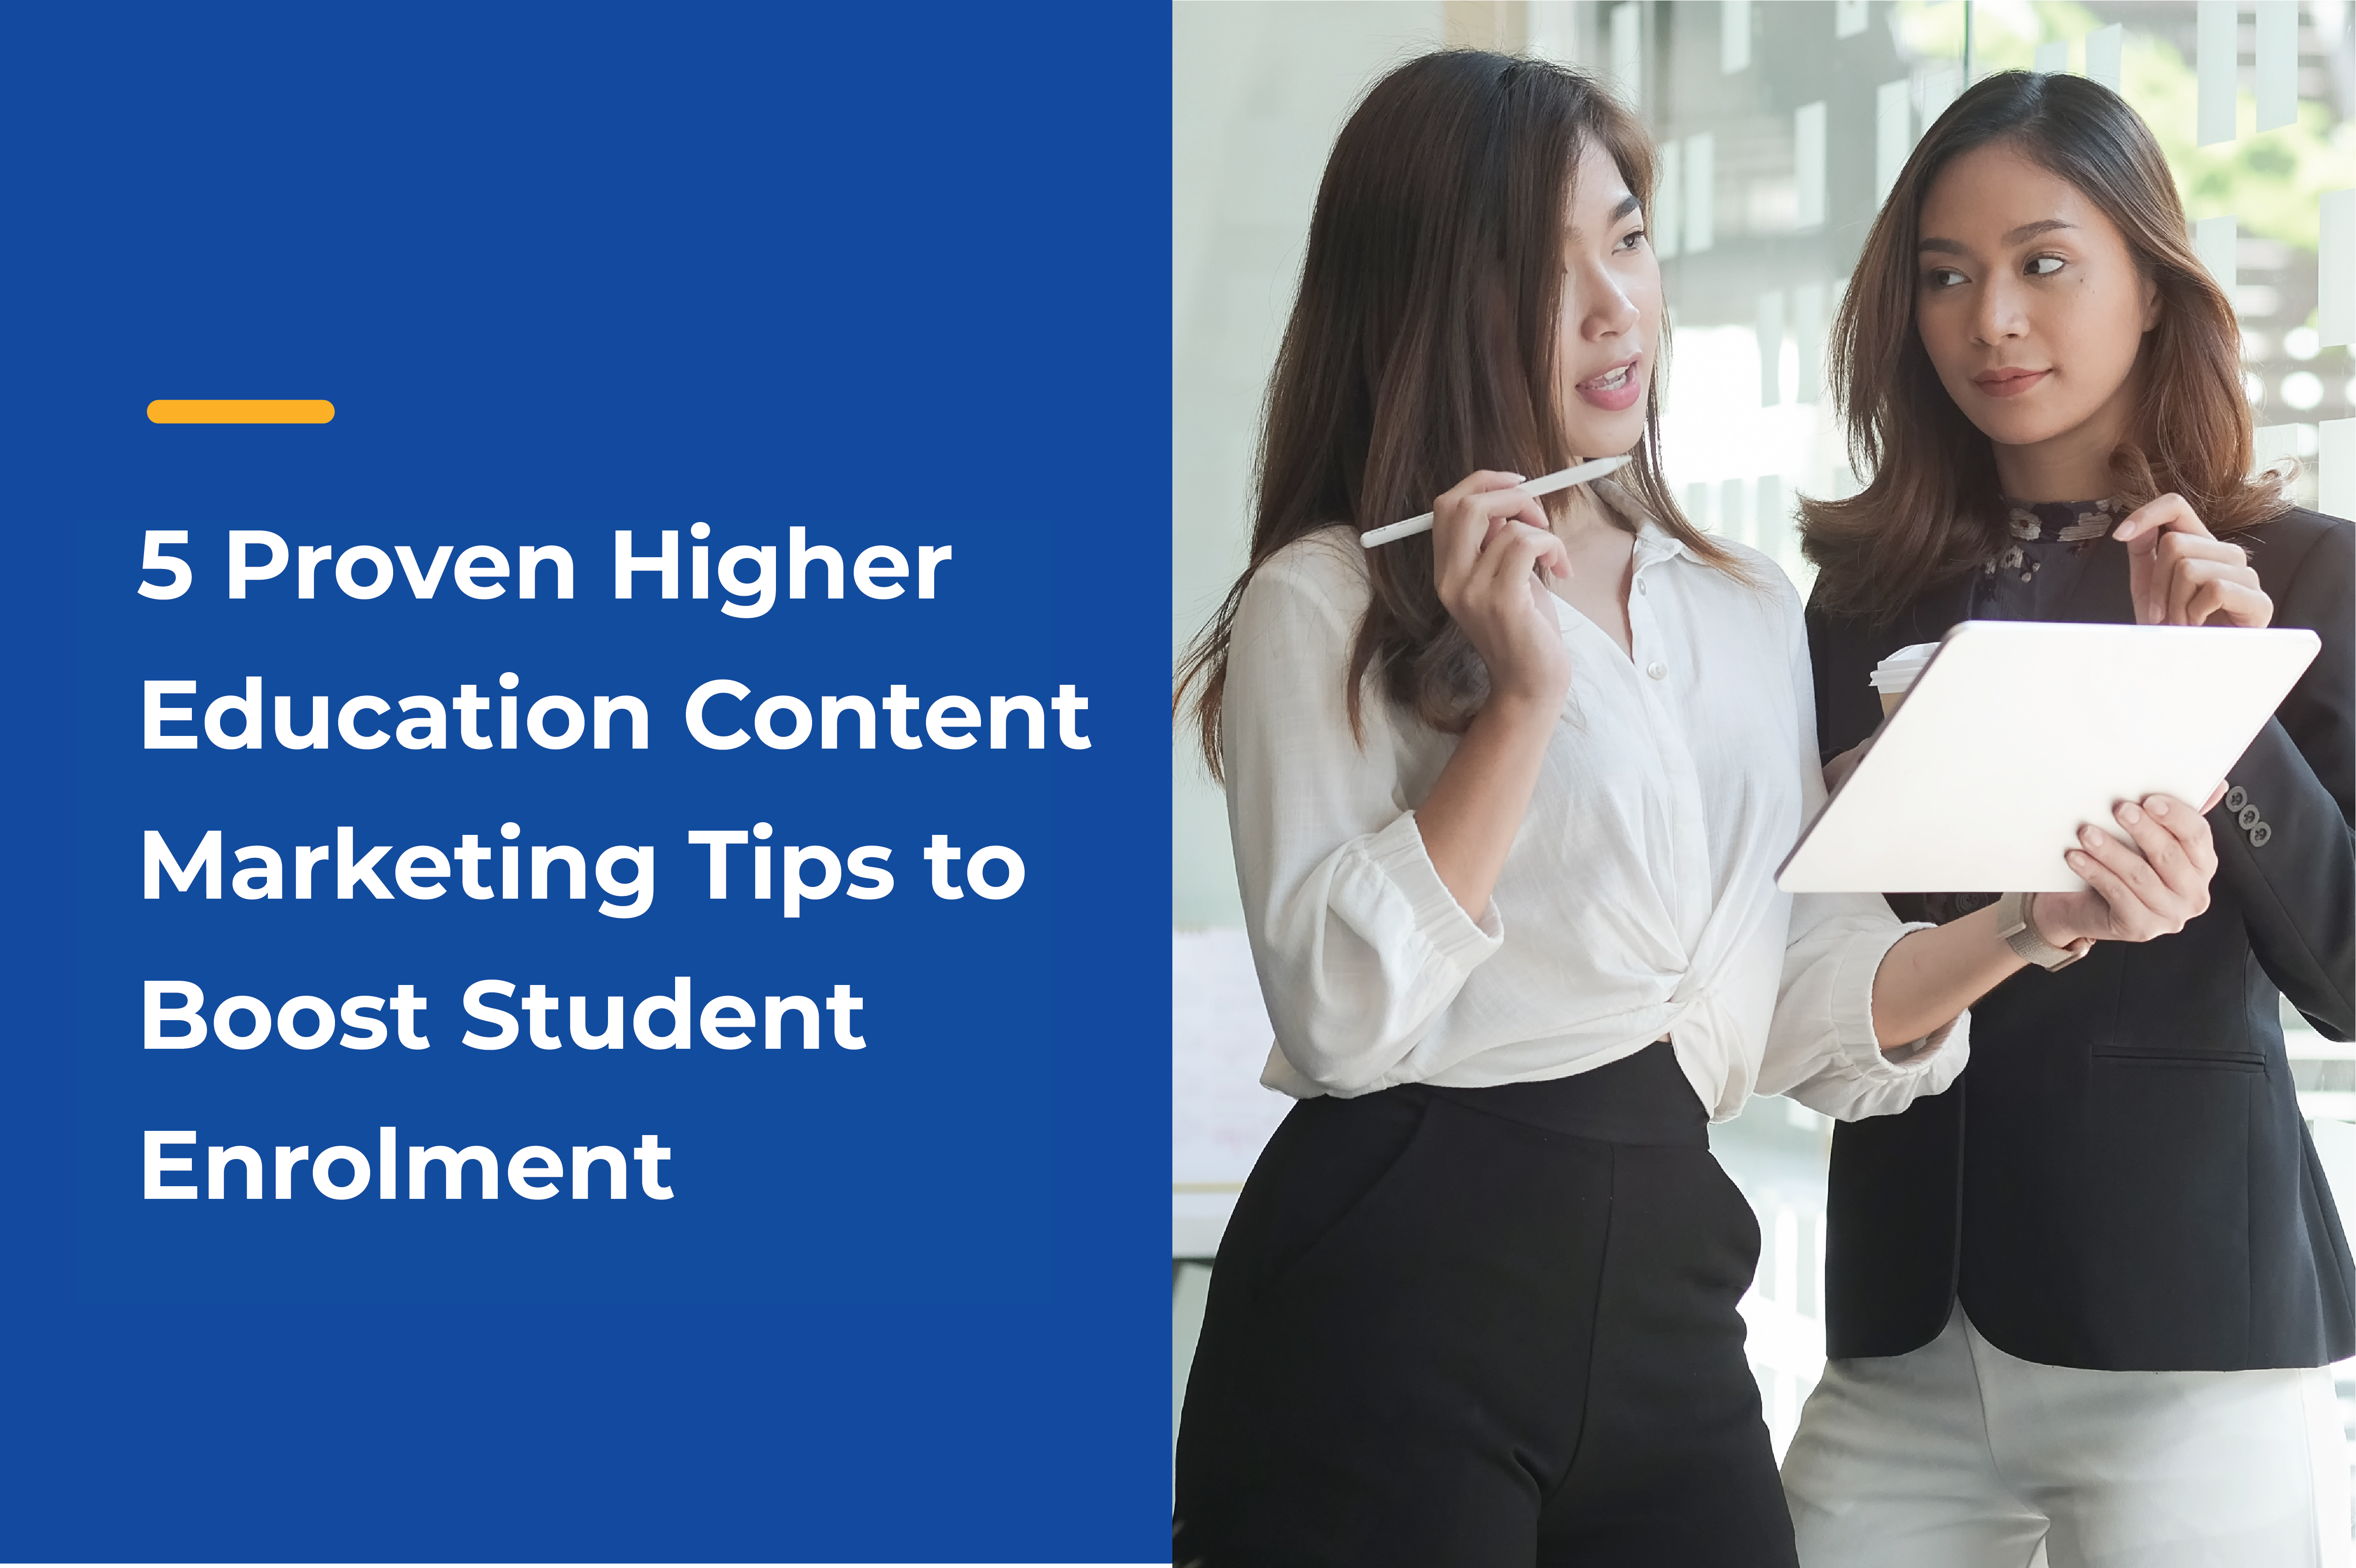 5 Proven Higher Education Content Marketing Tips to Boost Student Enrolment